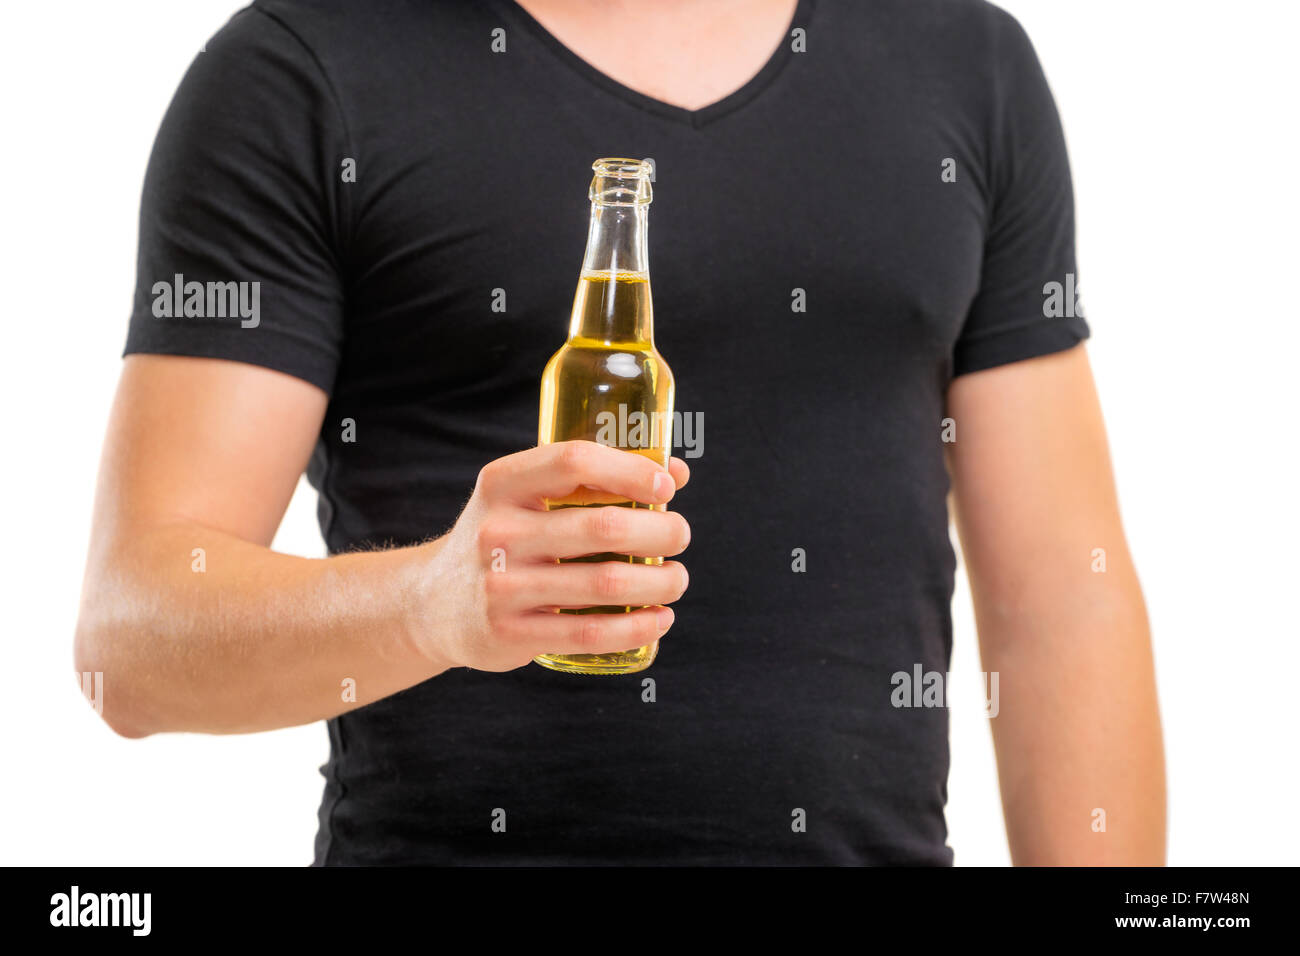 Cheers! Close up of male hand holding bottle of beer. Isolated on white. Stock Photo